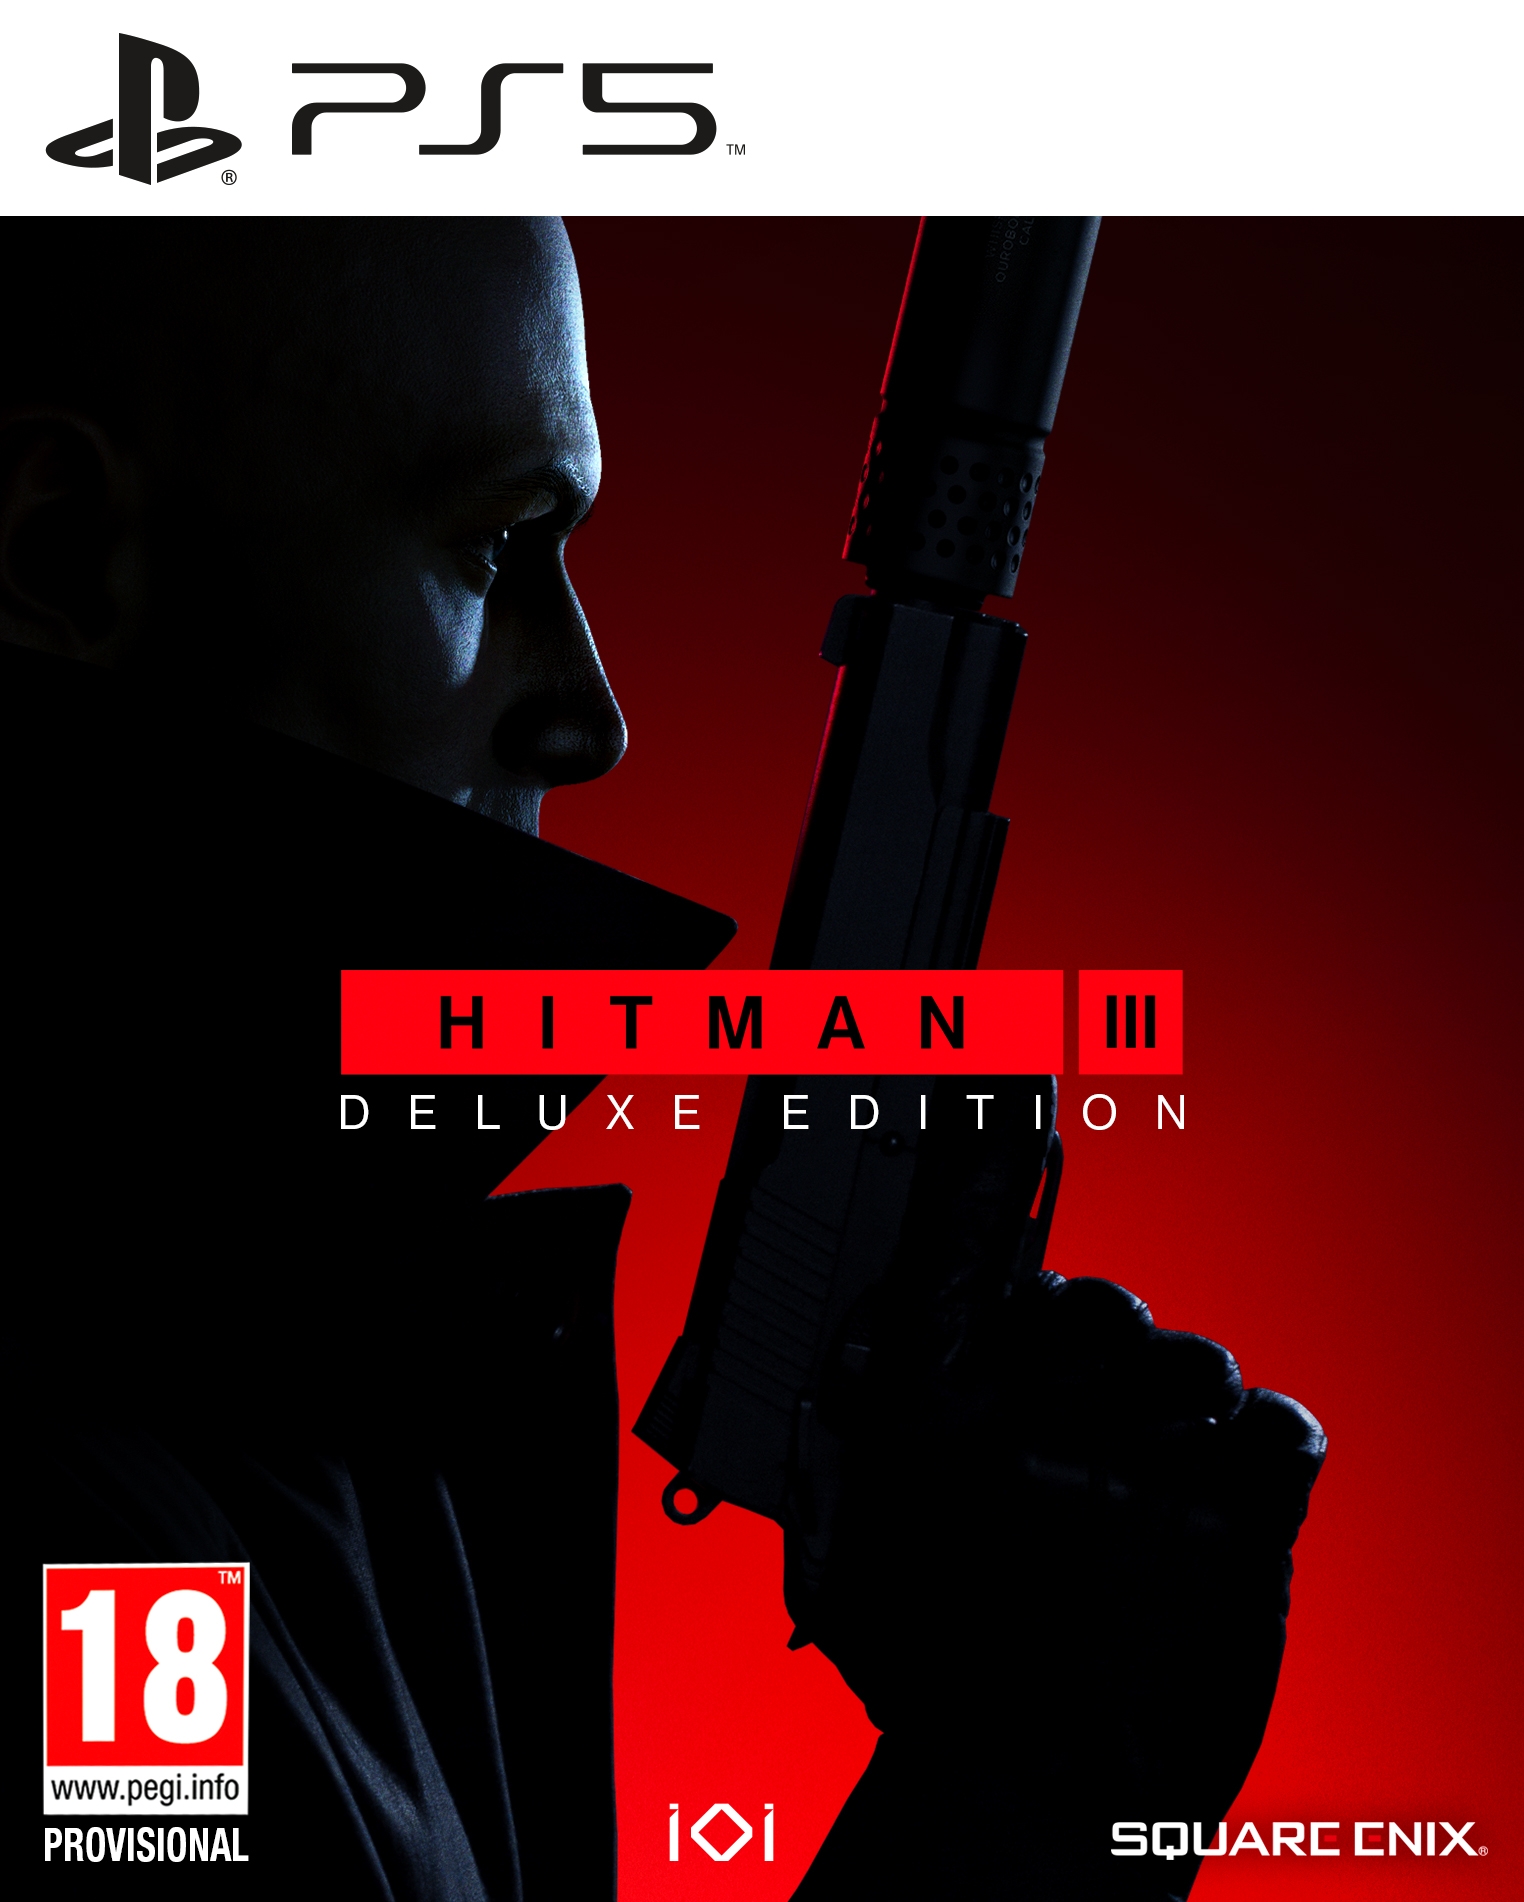 PS5 Hitman 3 Deluxe Edition